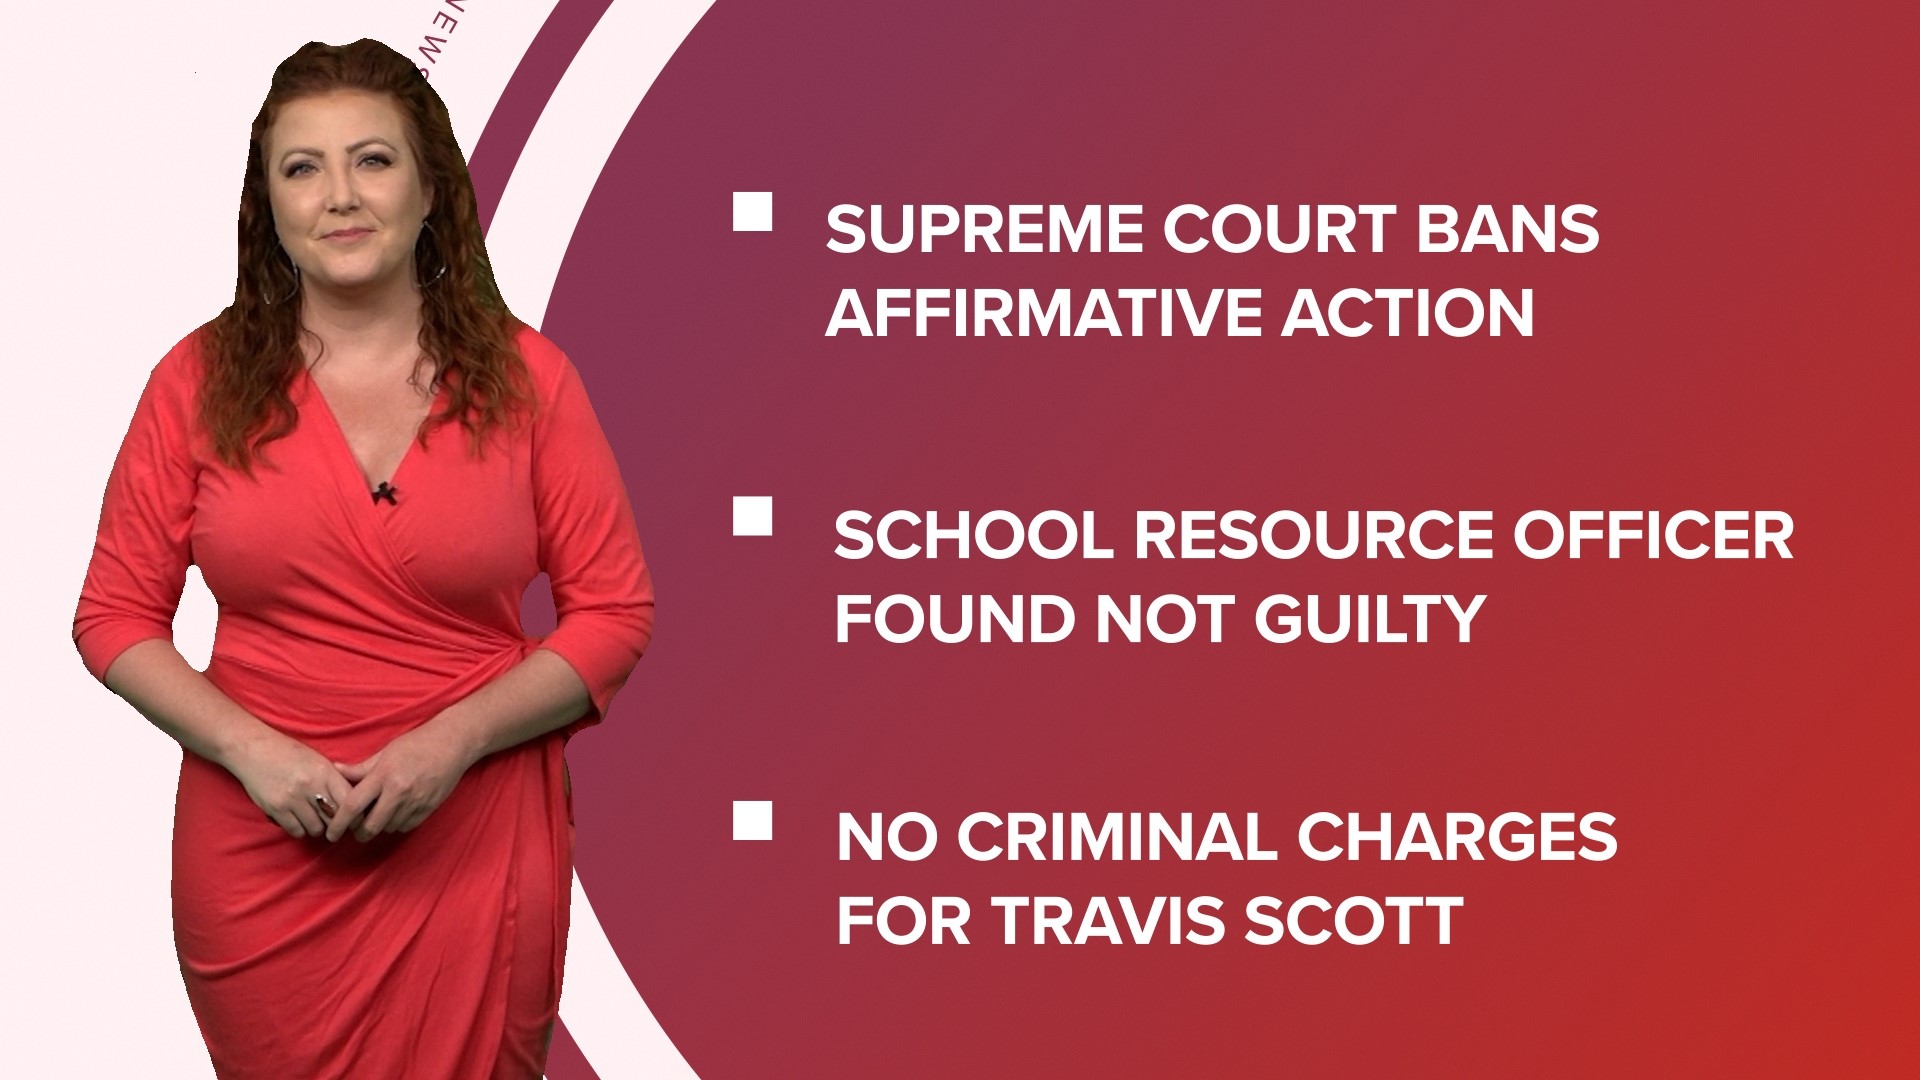 A look at what is happening in the news from the Supreme Court ruling on affirmative action at colleges to the dangers of rip currents.